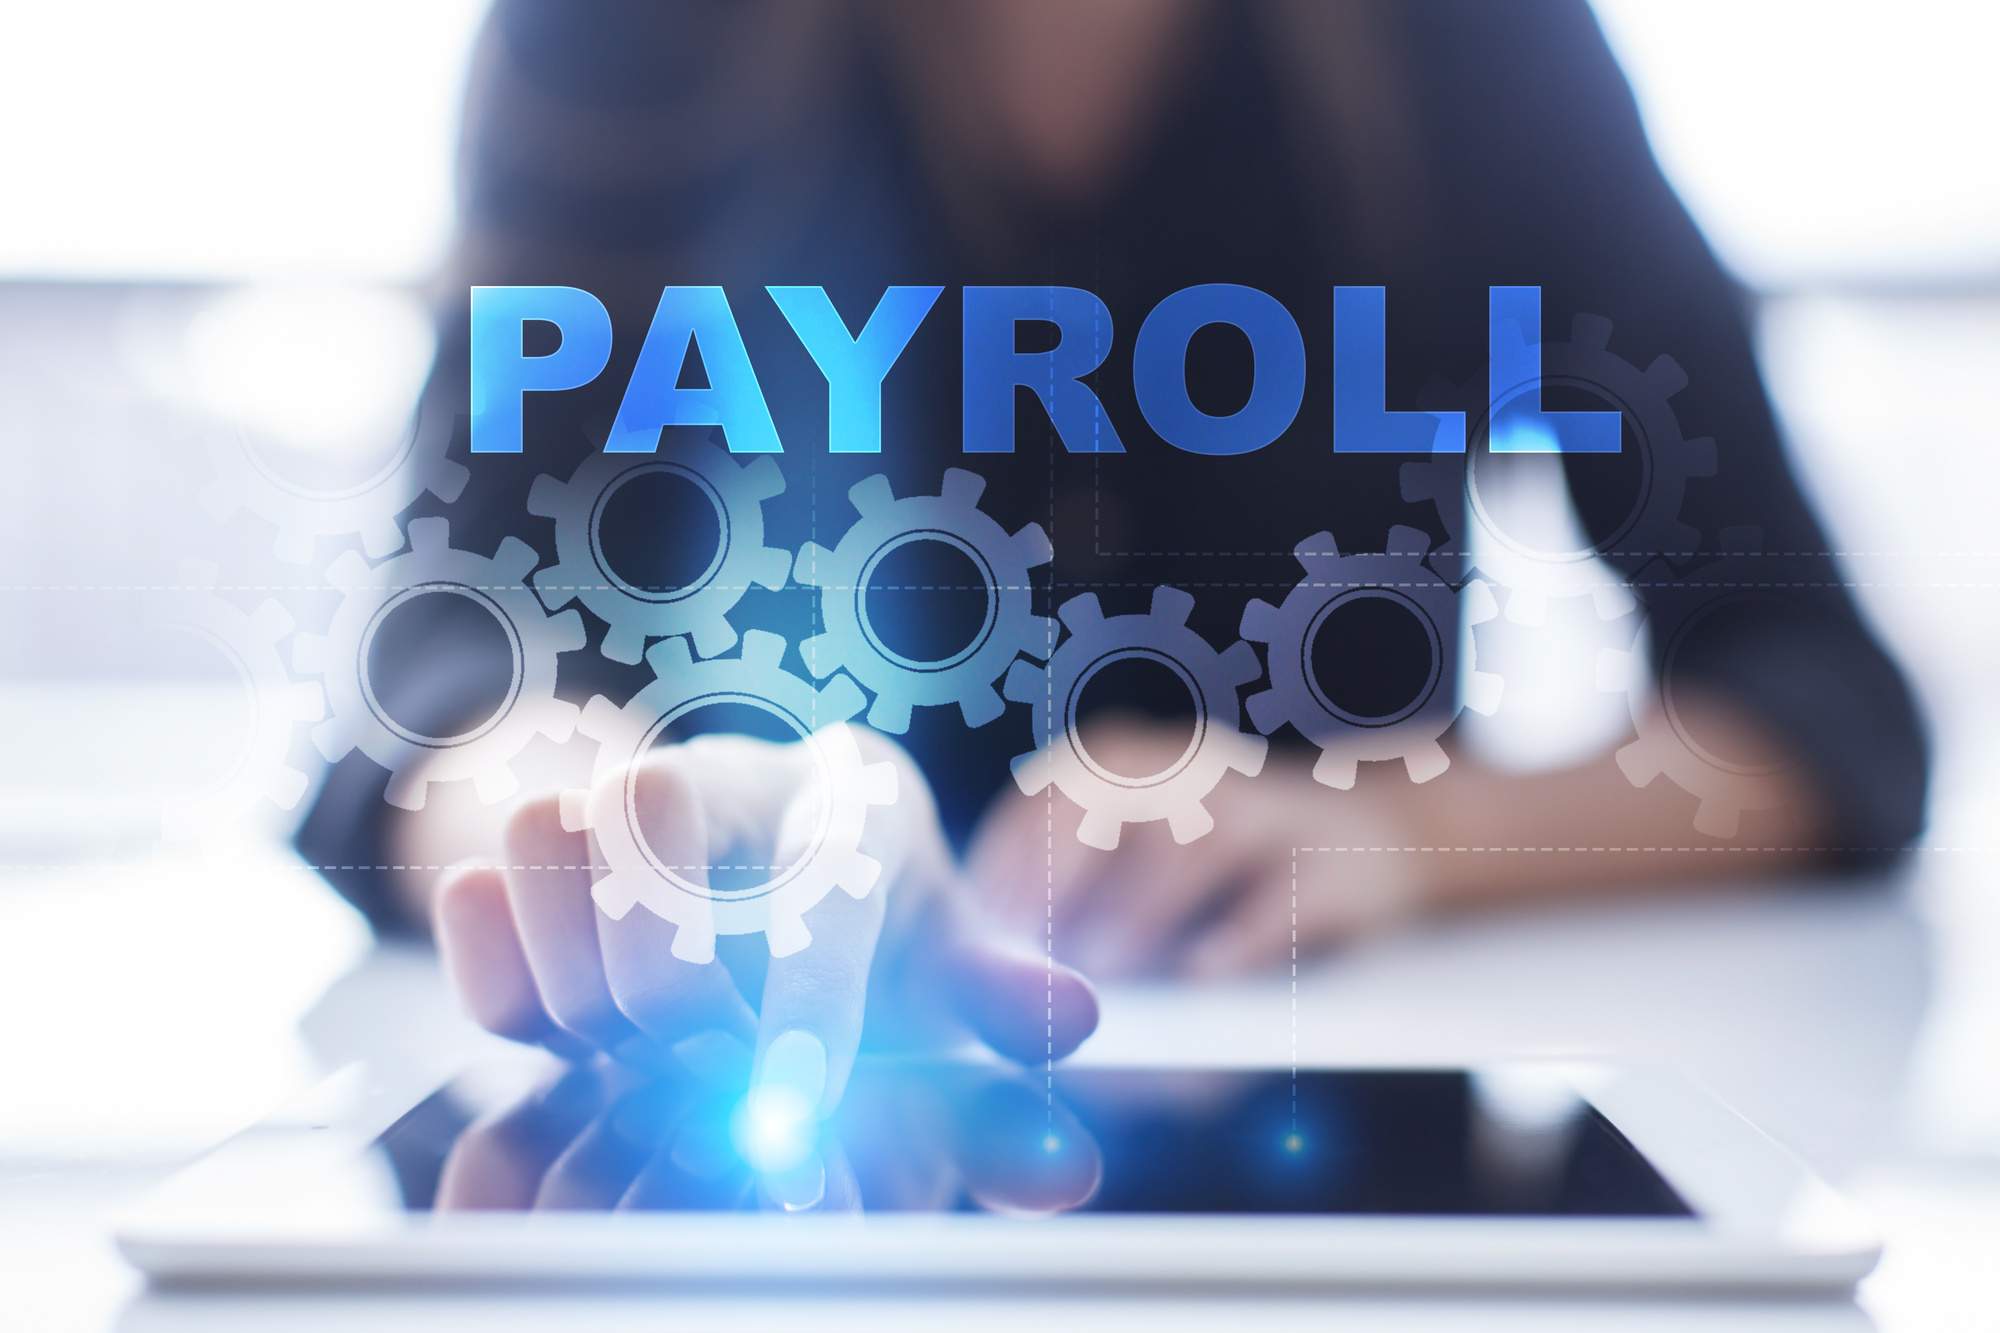 The One and Only Payroll Automation Guide You’ll Ever Need